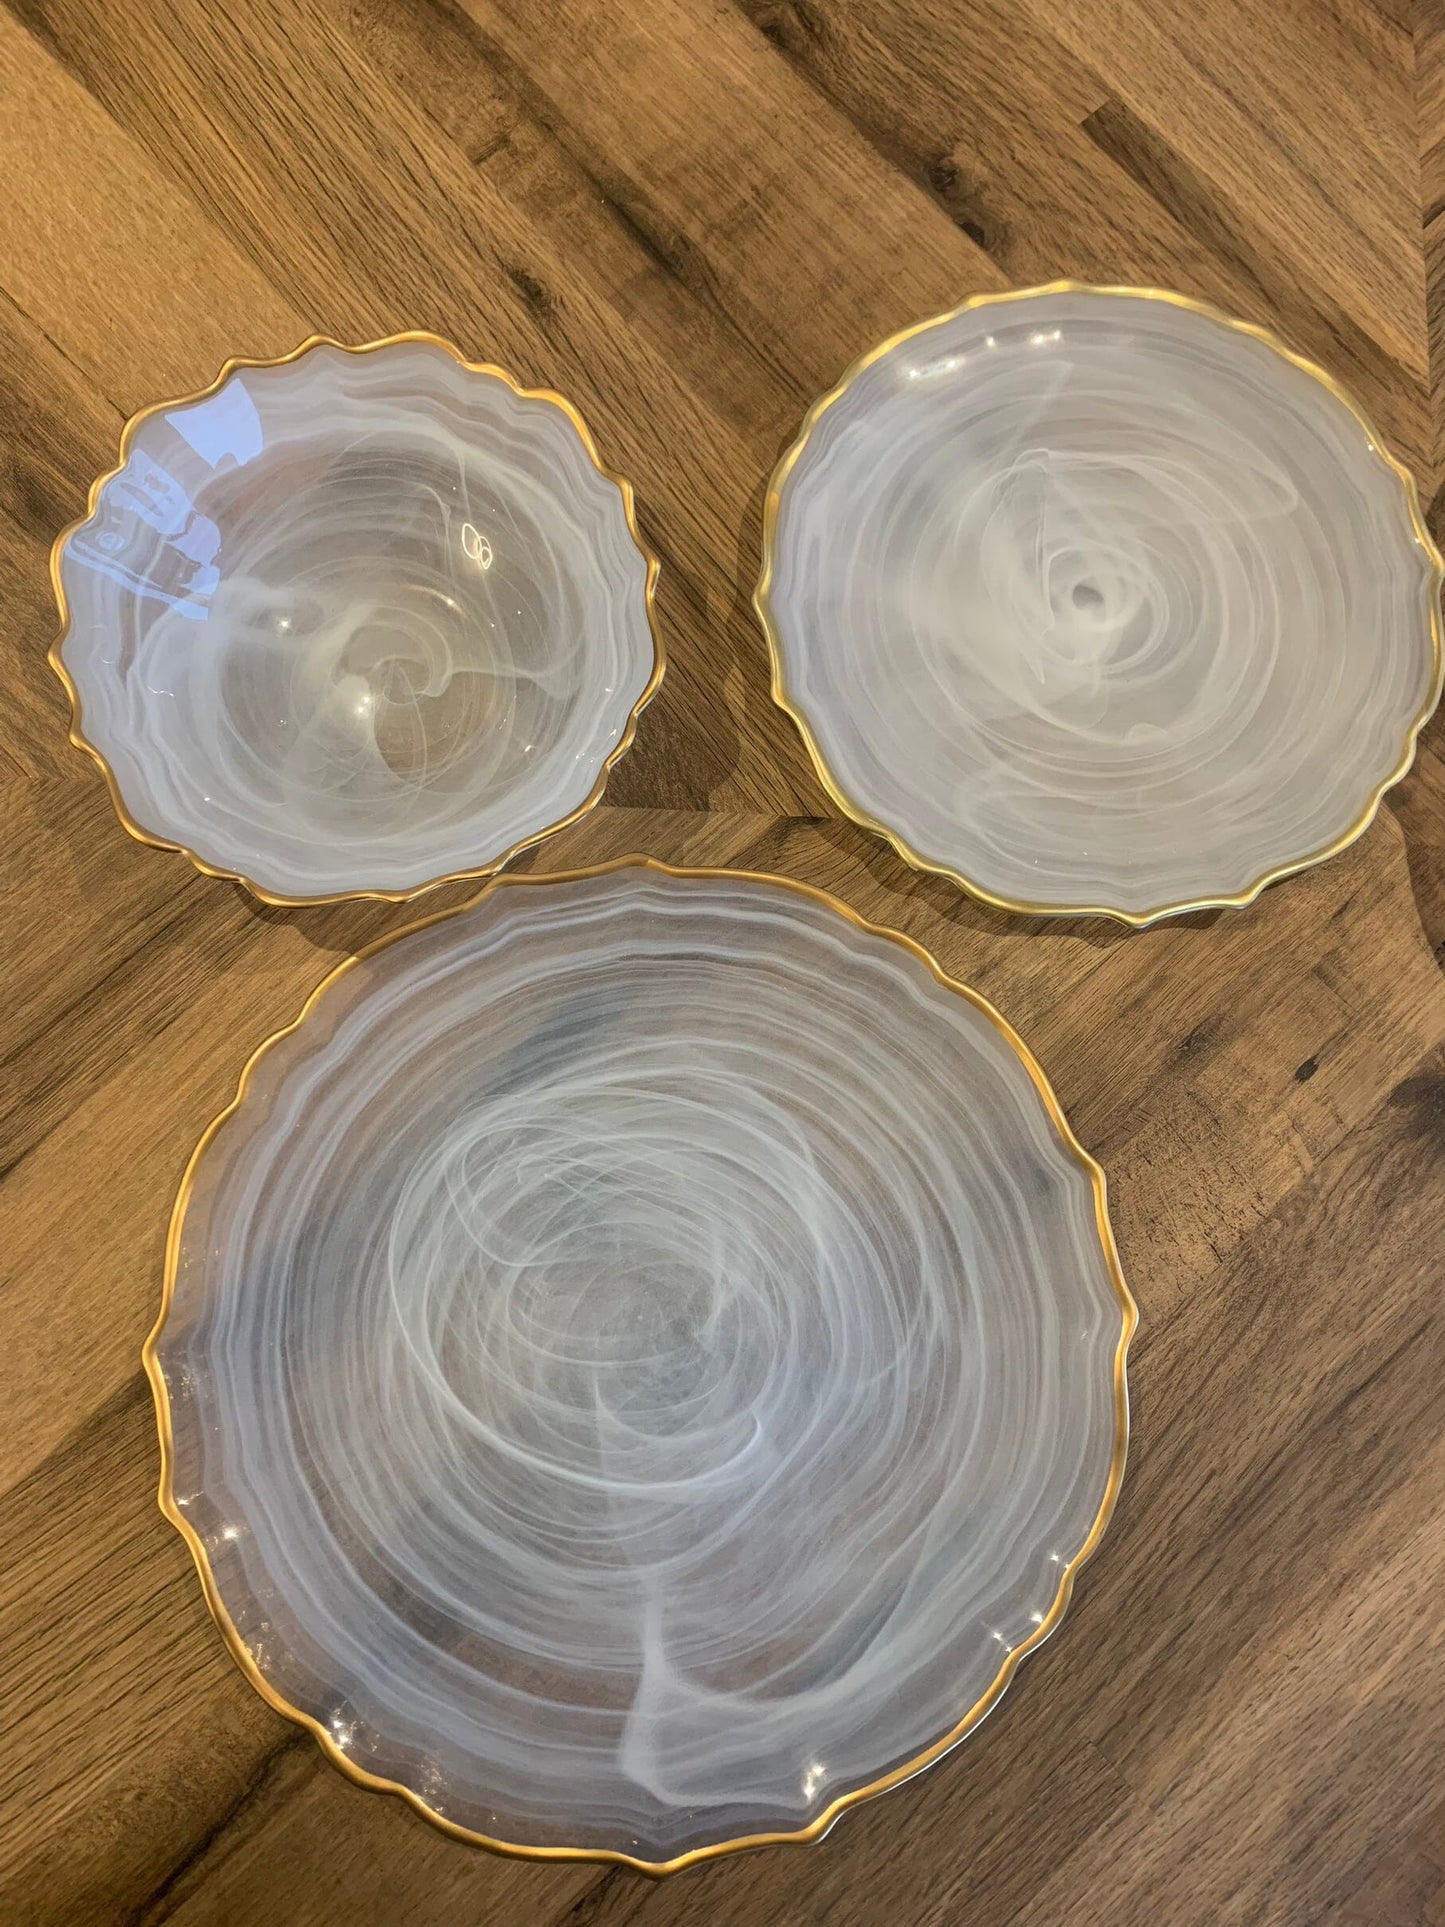 Dessert Plates in Alabaster White with Gold Trim - Set of 4 Plates High Class Touch - Home Decor 